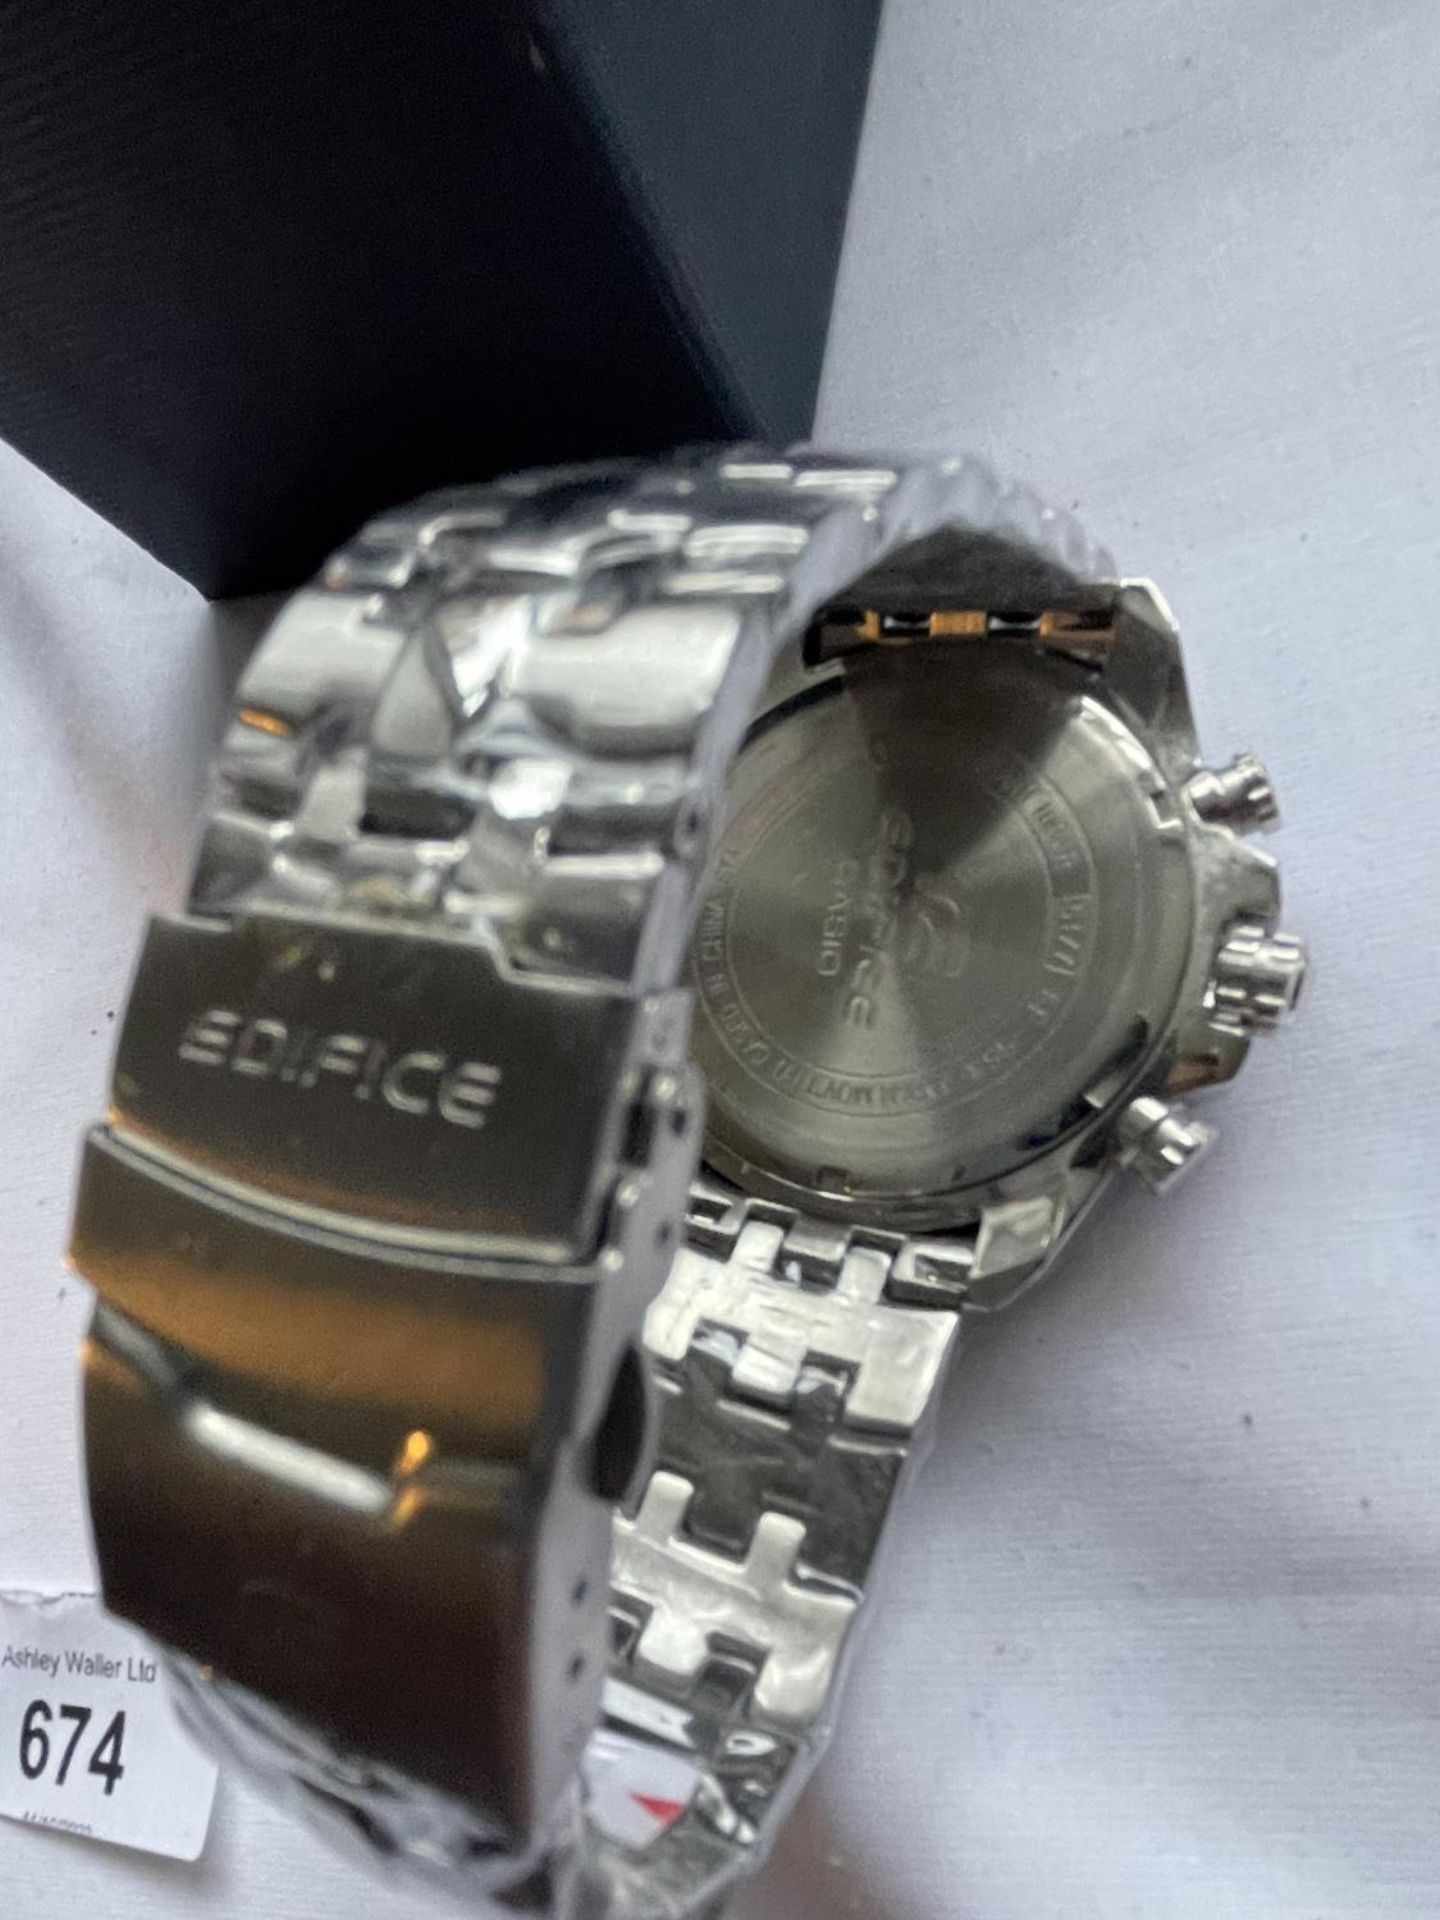 AN AS NEW AND BOXED CASIO EDIFICE WRIST WATCH SEEN WORKING BUT NO WARRANTY - Image 3 of 3